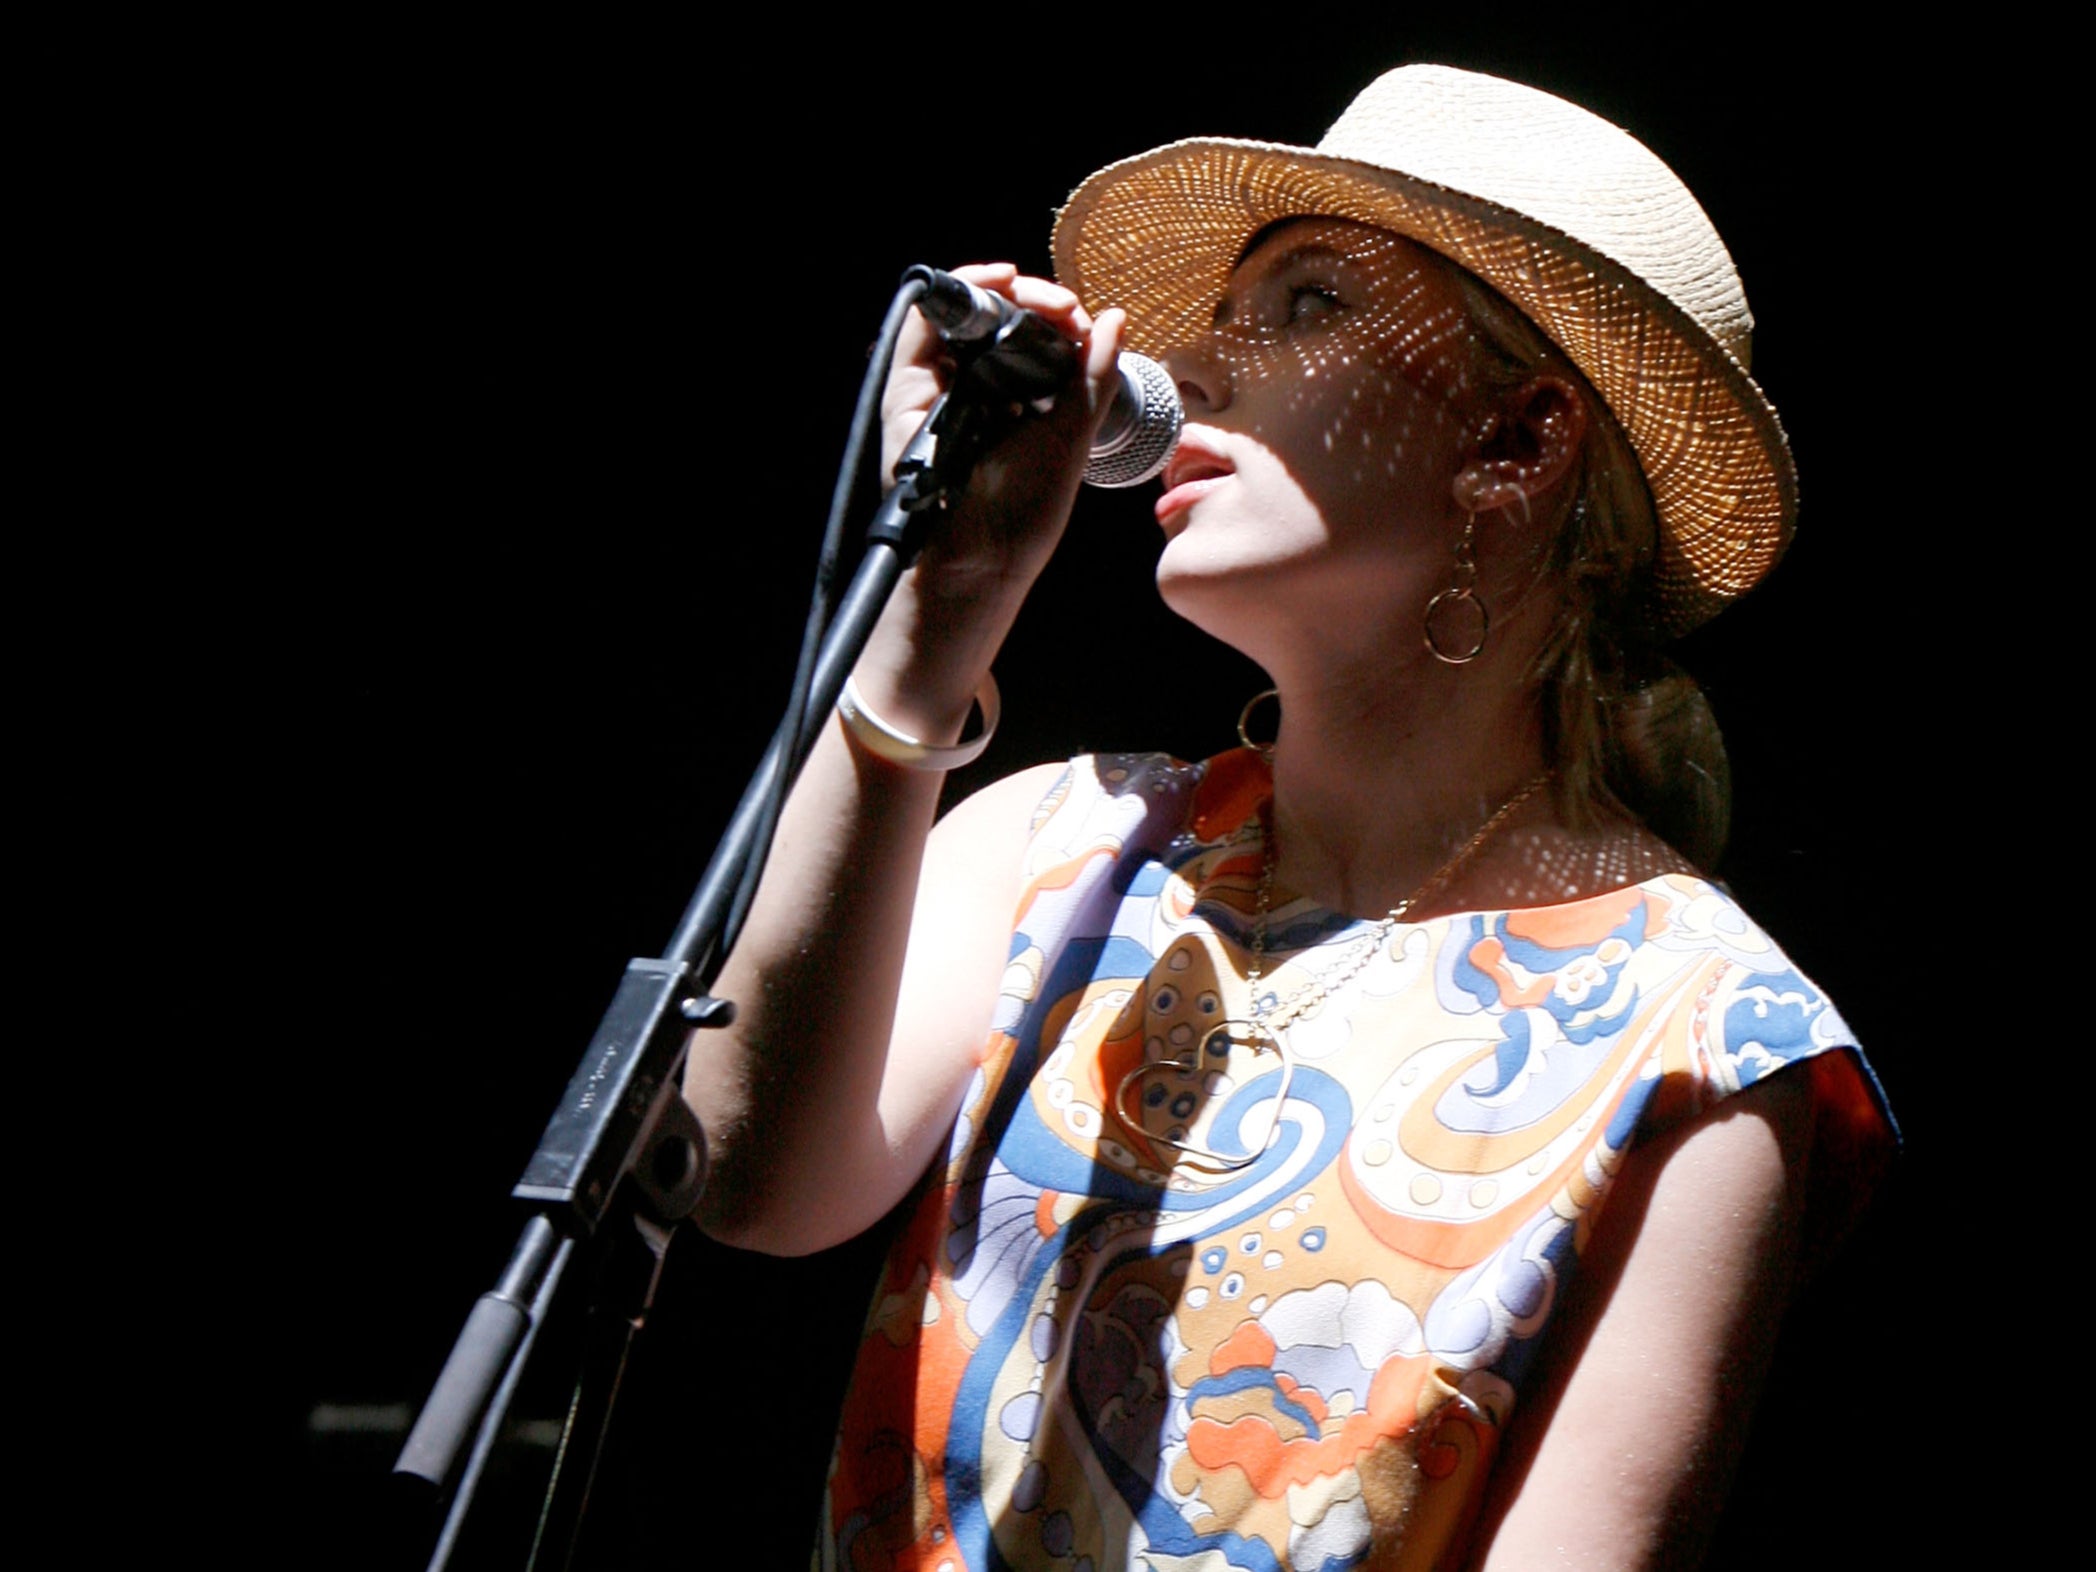 Scarlett Johansson sings with The Jesus And Mary Chain at Coachella Music Festival in 2007